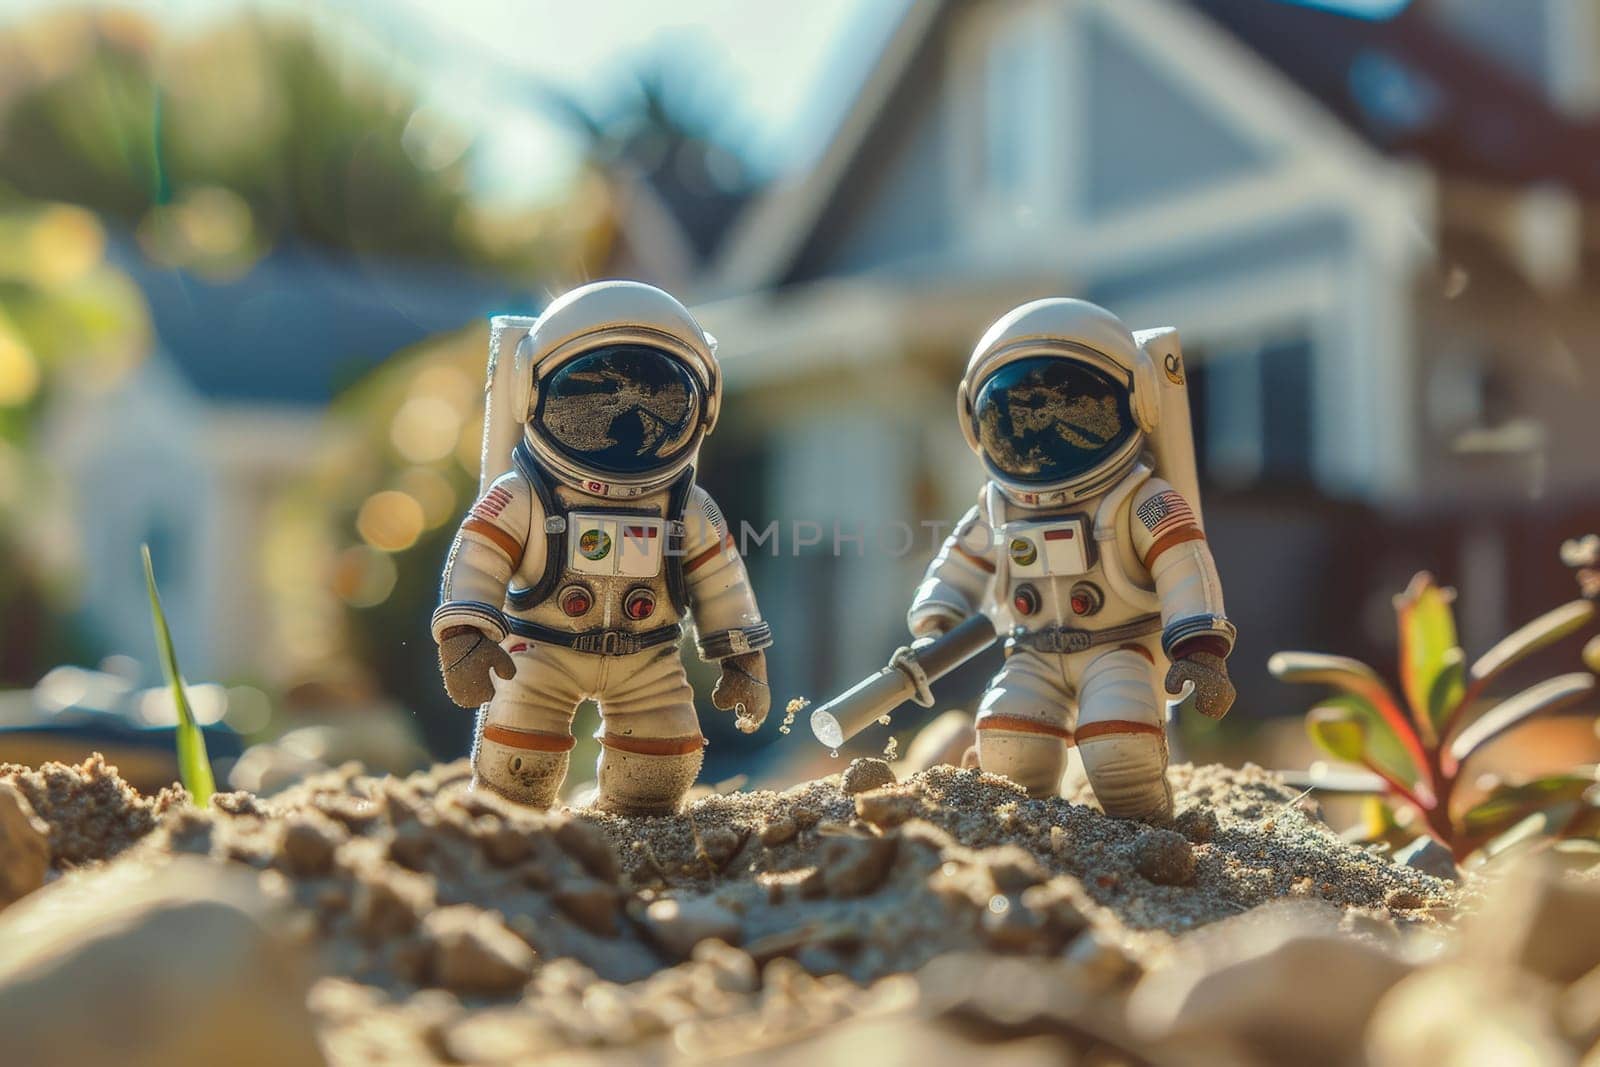 Miniature astronaut background, Miniature astronaut dolls exploring a sandpile in front of a house by nijieimu